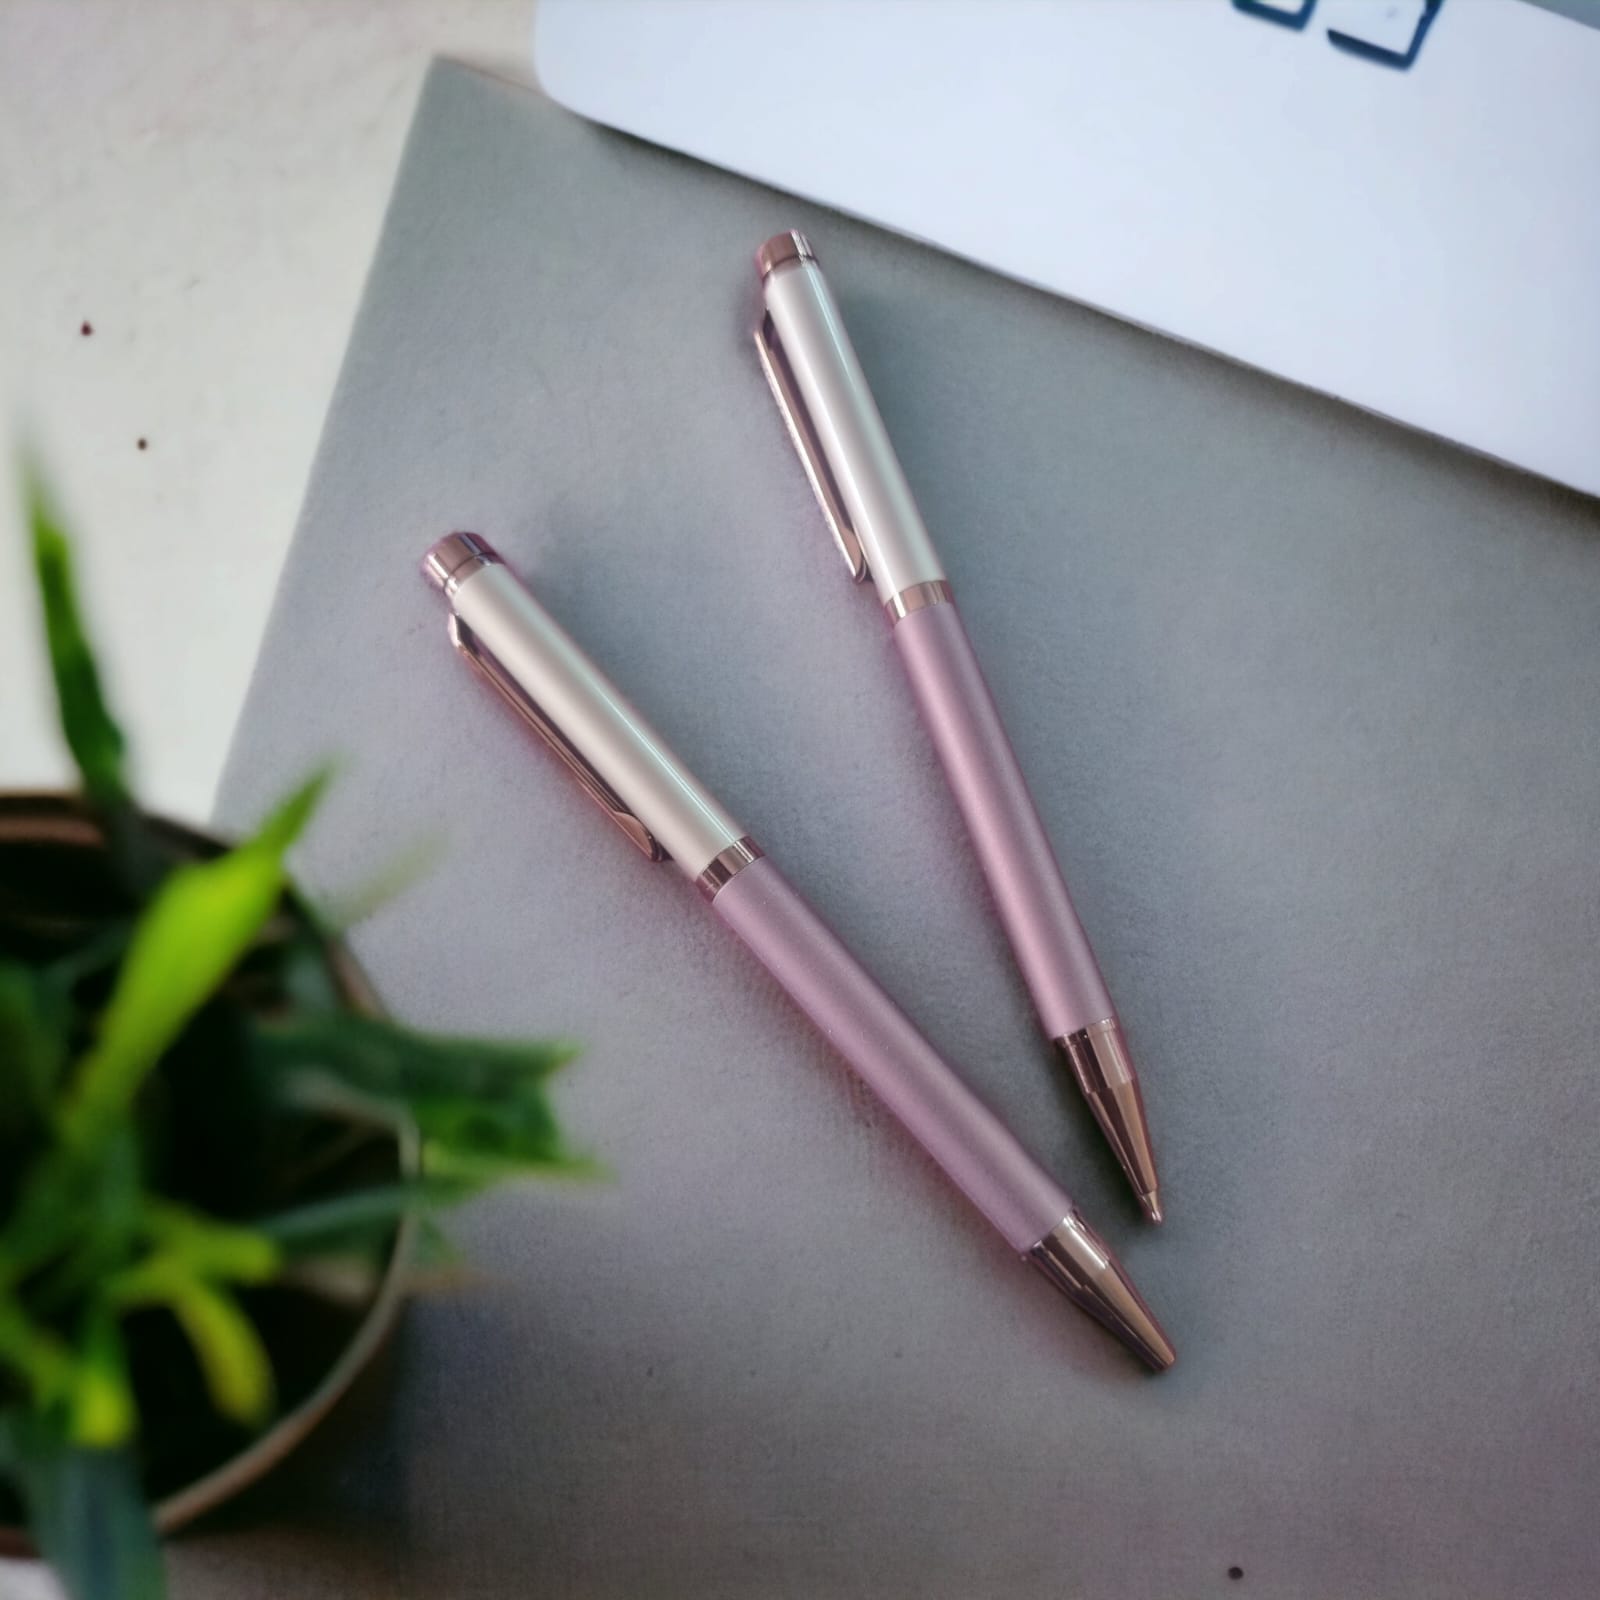 national stationery mumbai Pens "Premium dual shade body pen, Silver and Rose Gold  with shiny silver clip "